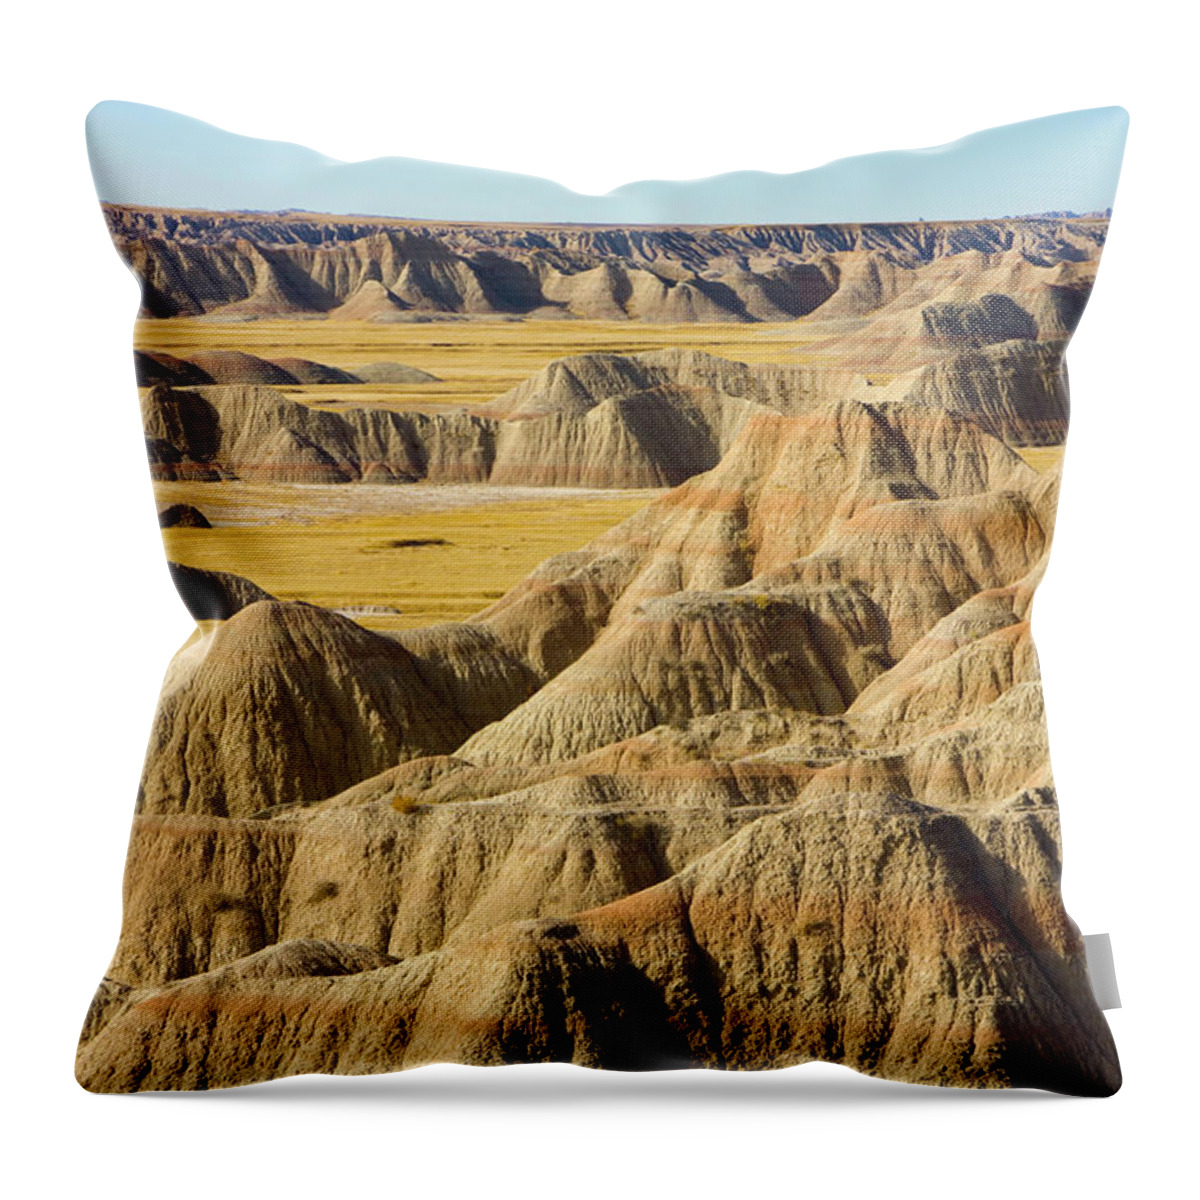 Scenics Throw Pillow featuring the photograph Usa, South Dakota, Badlands Np, Eroded by Eastcott Momatiuk